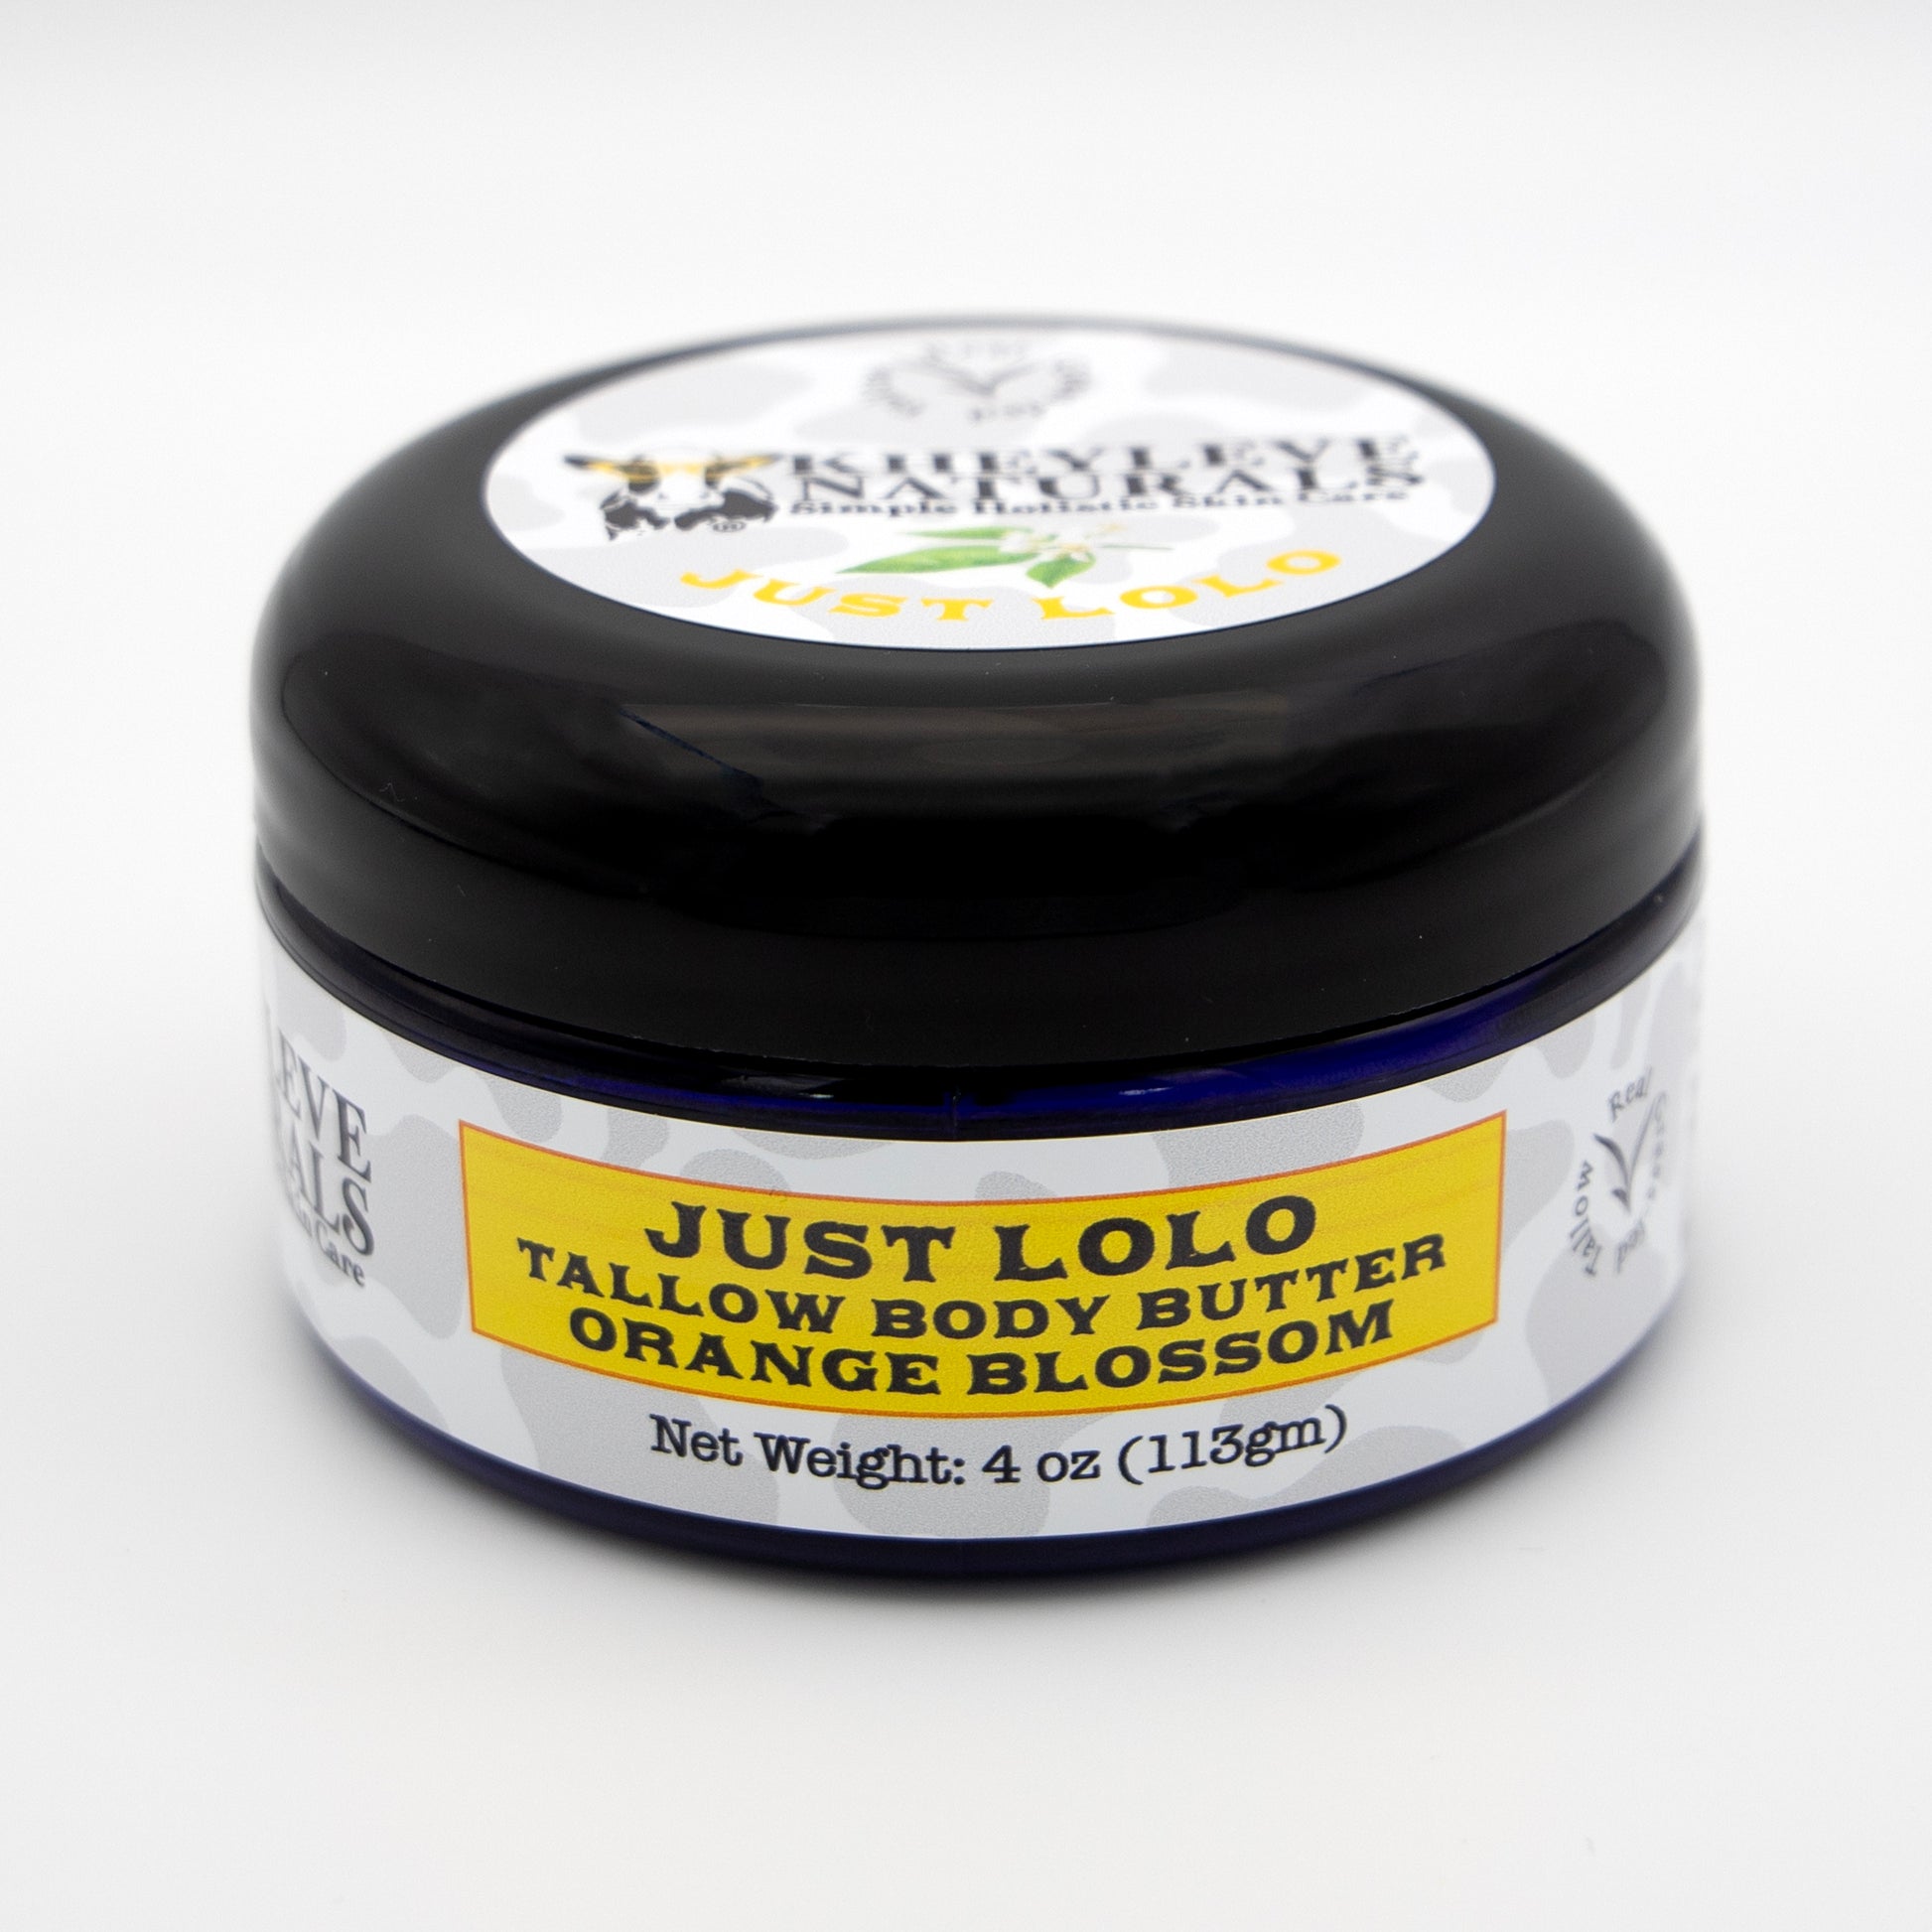 Orange Blossom Just LoLo is a beguiling combination of Neroli (bitter orange) essential oil and sweet orange essential oil, blended with our signature Just LoLo Body Butter.